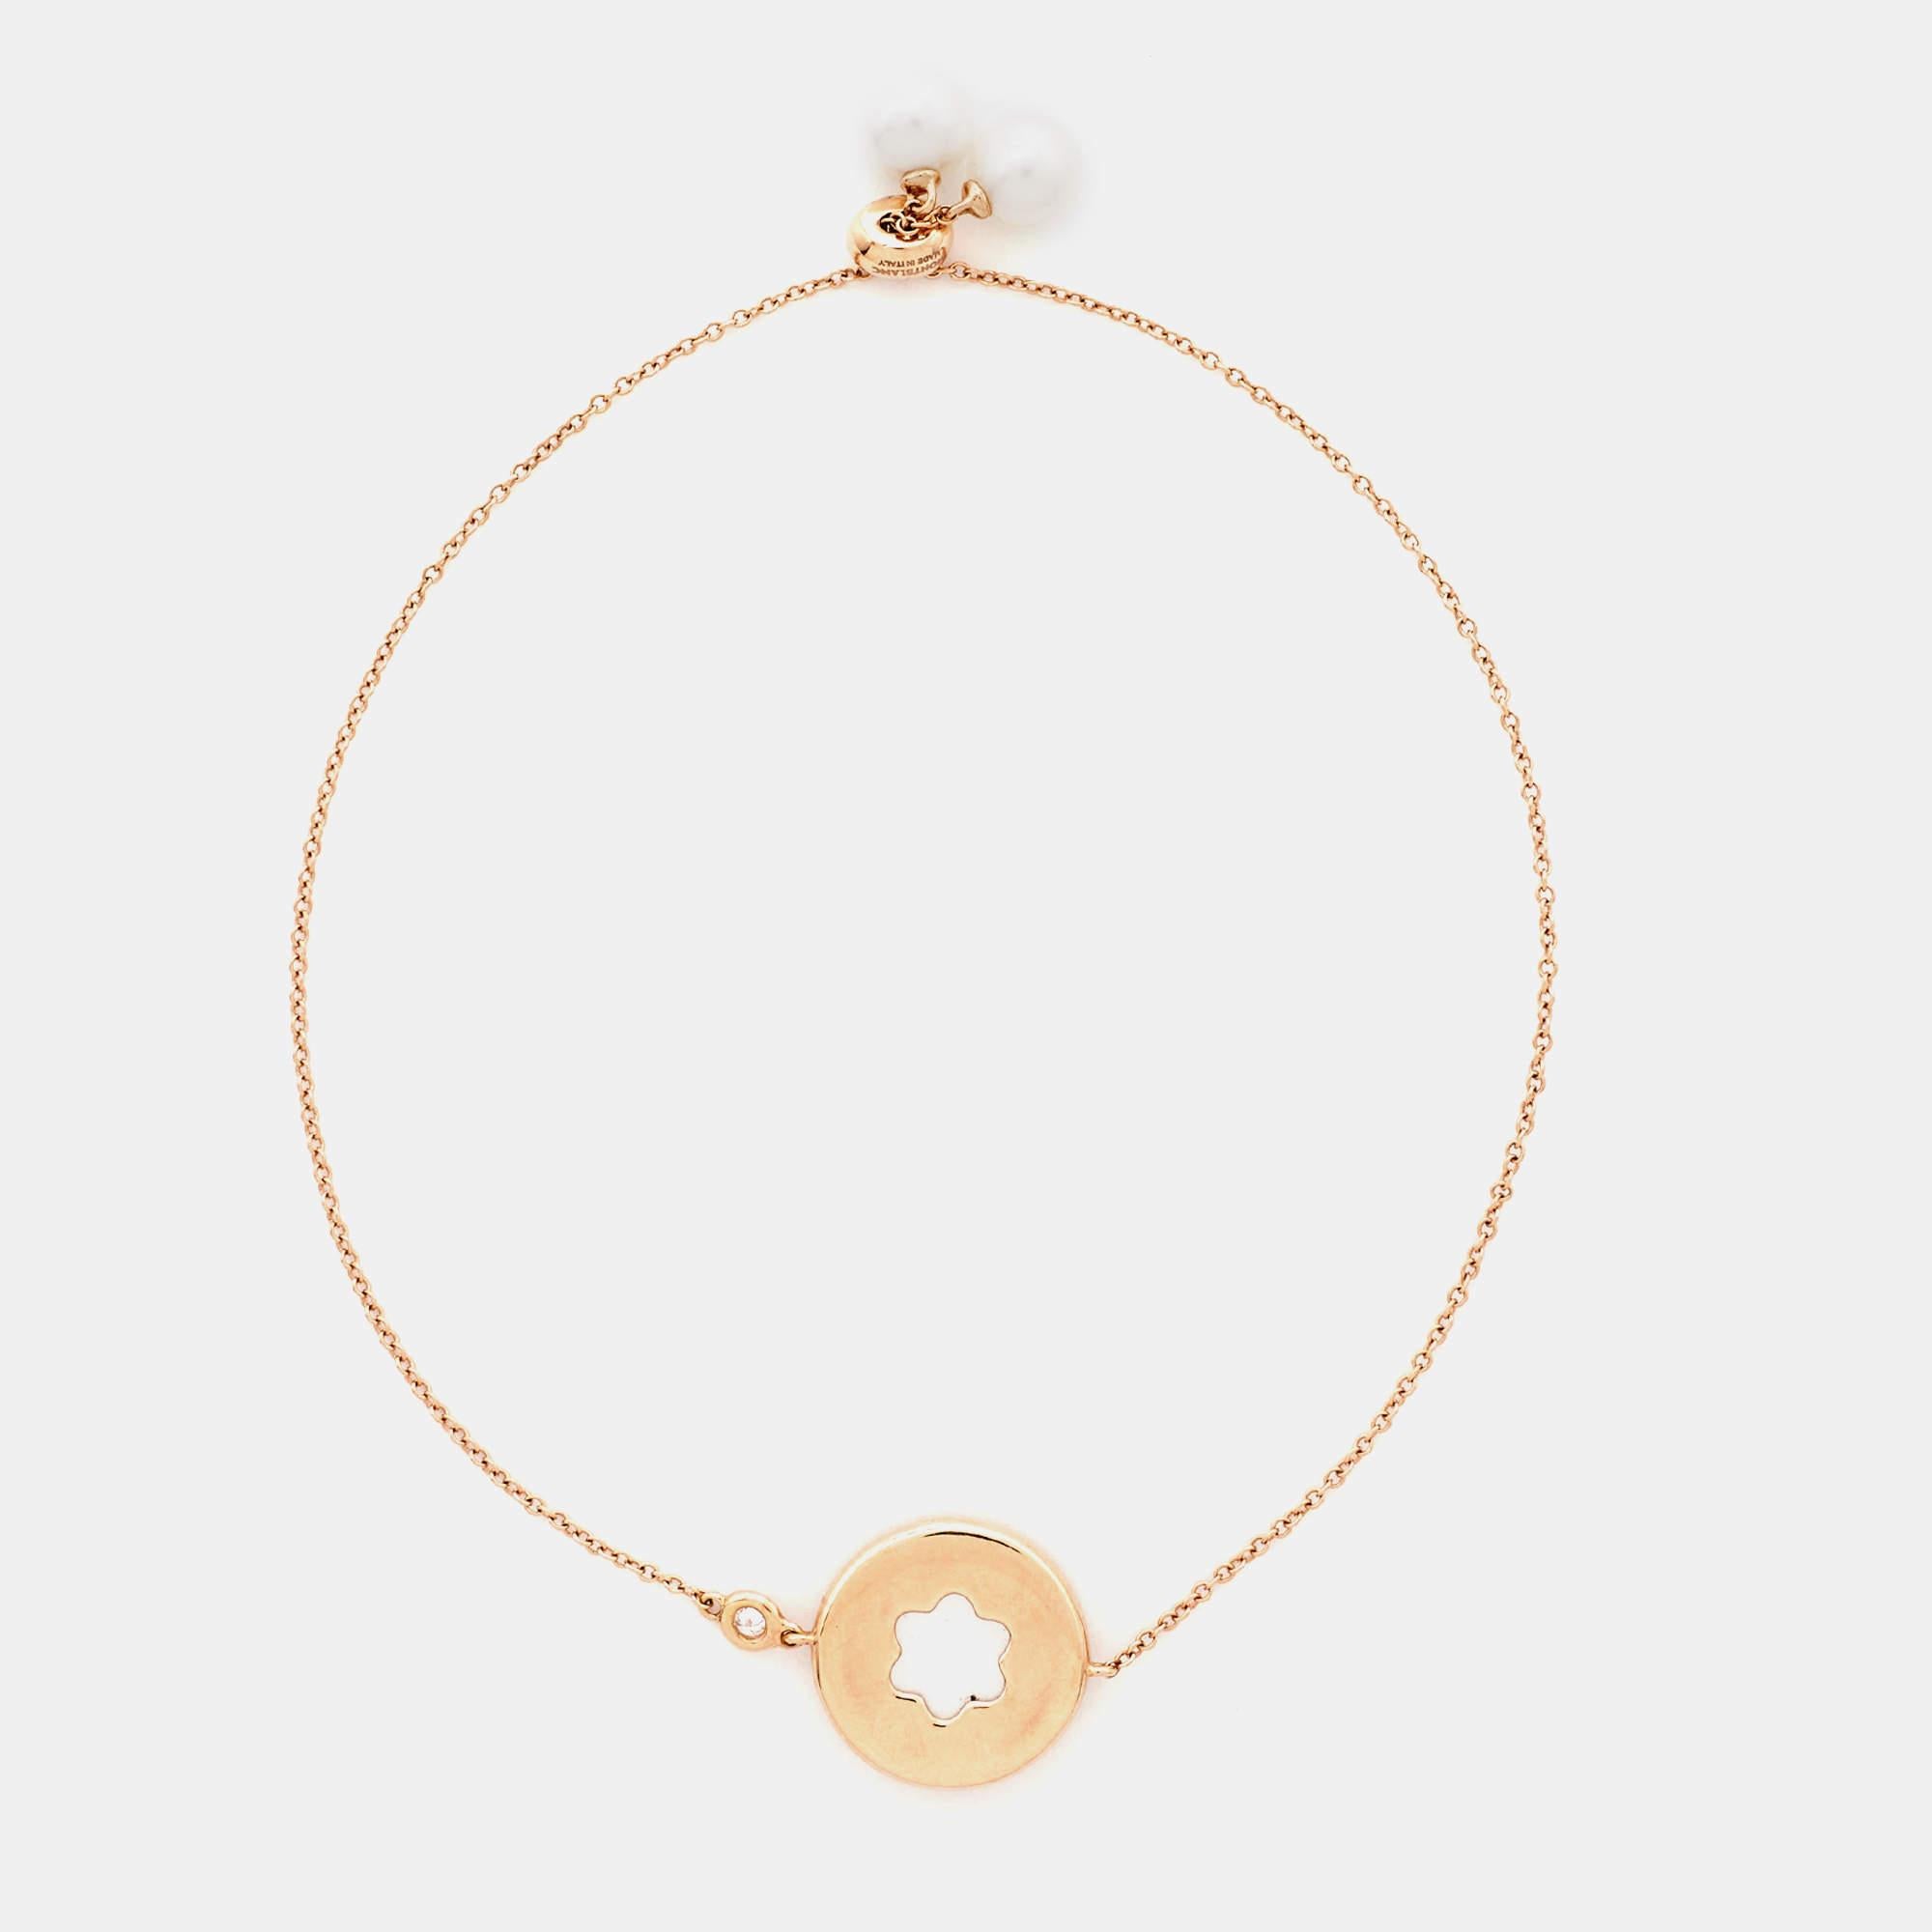 This bracelet by Montblanc exudes elegance in a refined manner. Made from 18K rose gold, it has a minimal design. The highlight of this stunning piece is the logo signet charm inlaid with mother of pearl.

